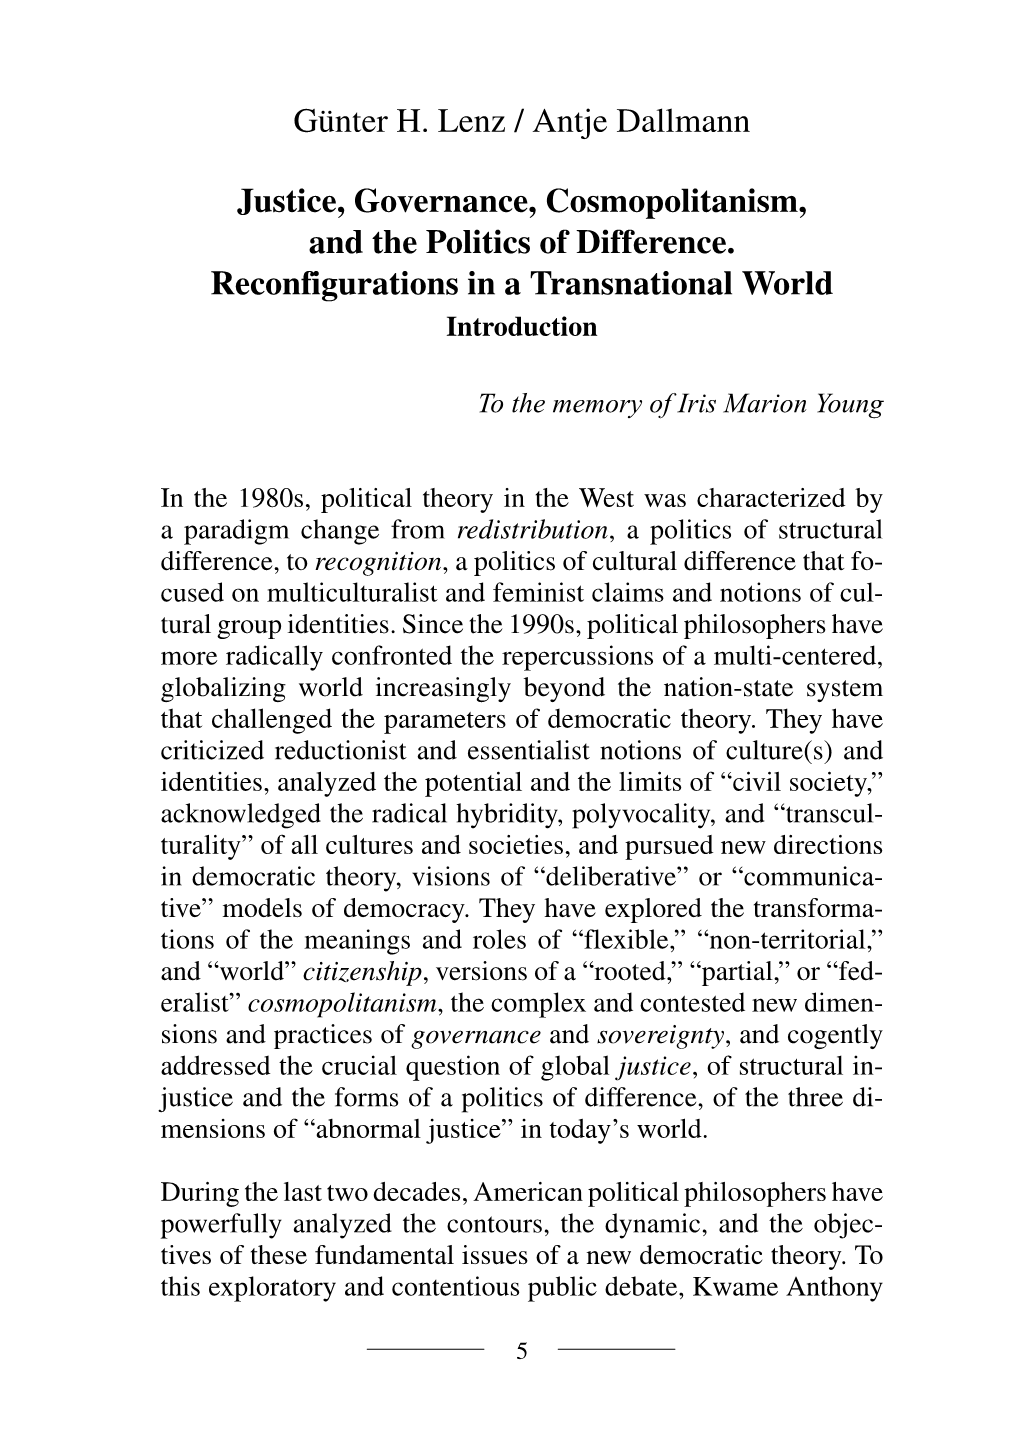 Justice, Governance, Cosmopolitanism, and the Politics of Difference